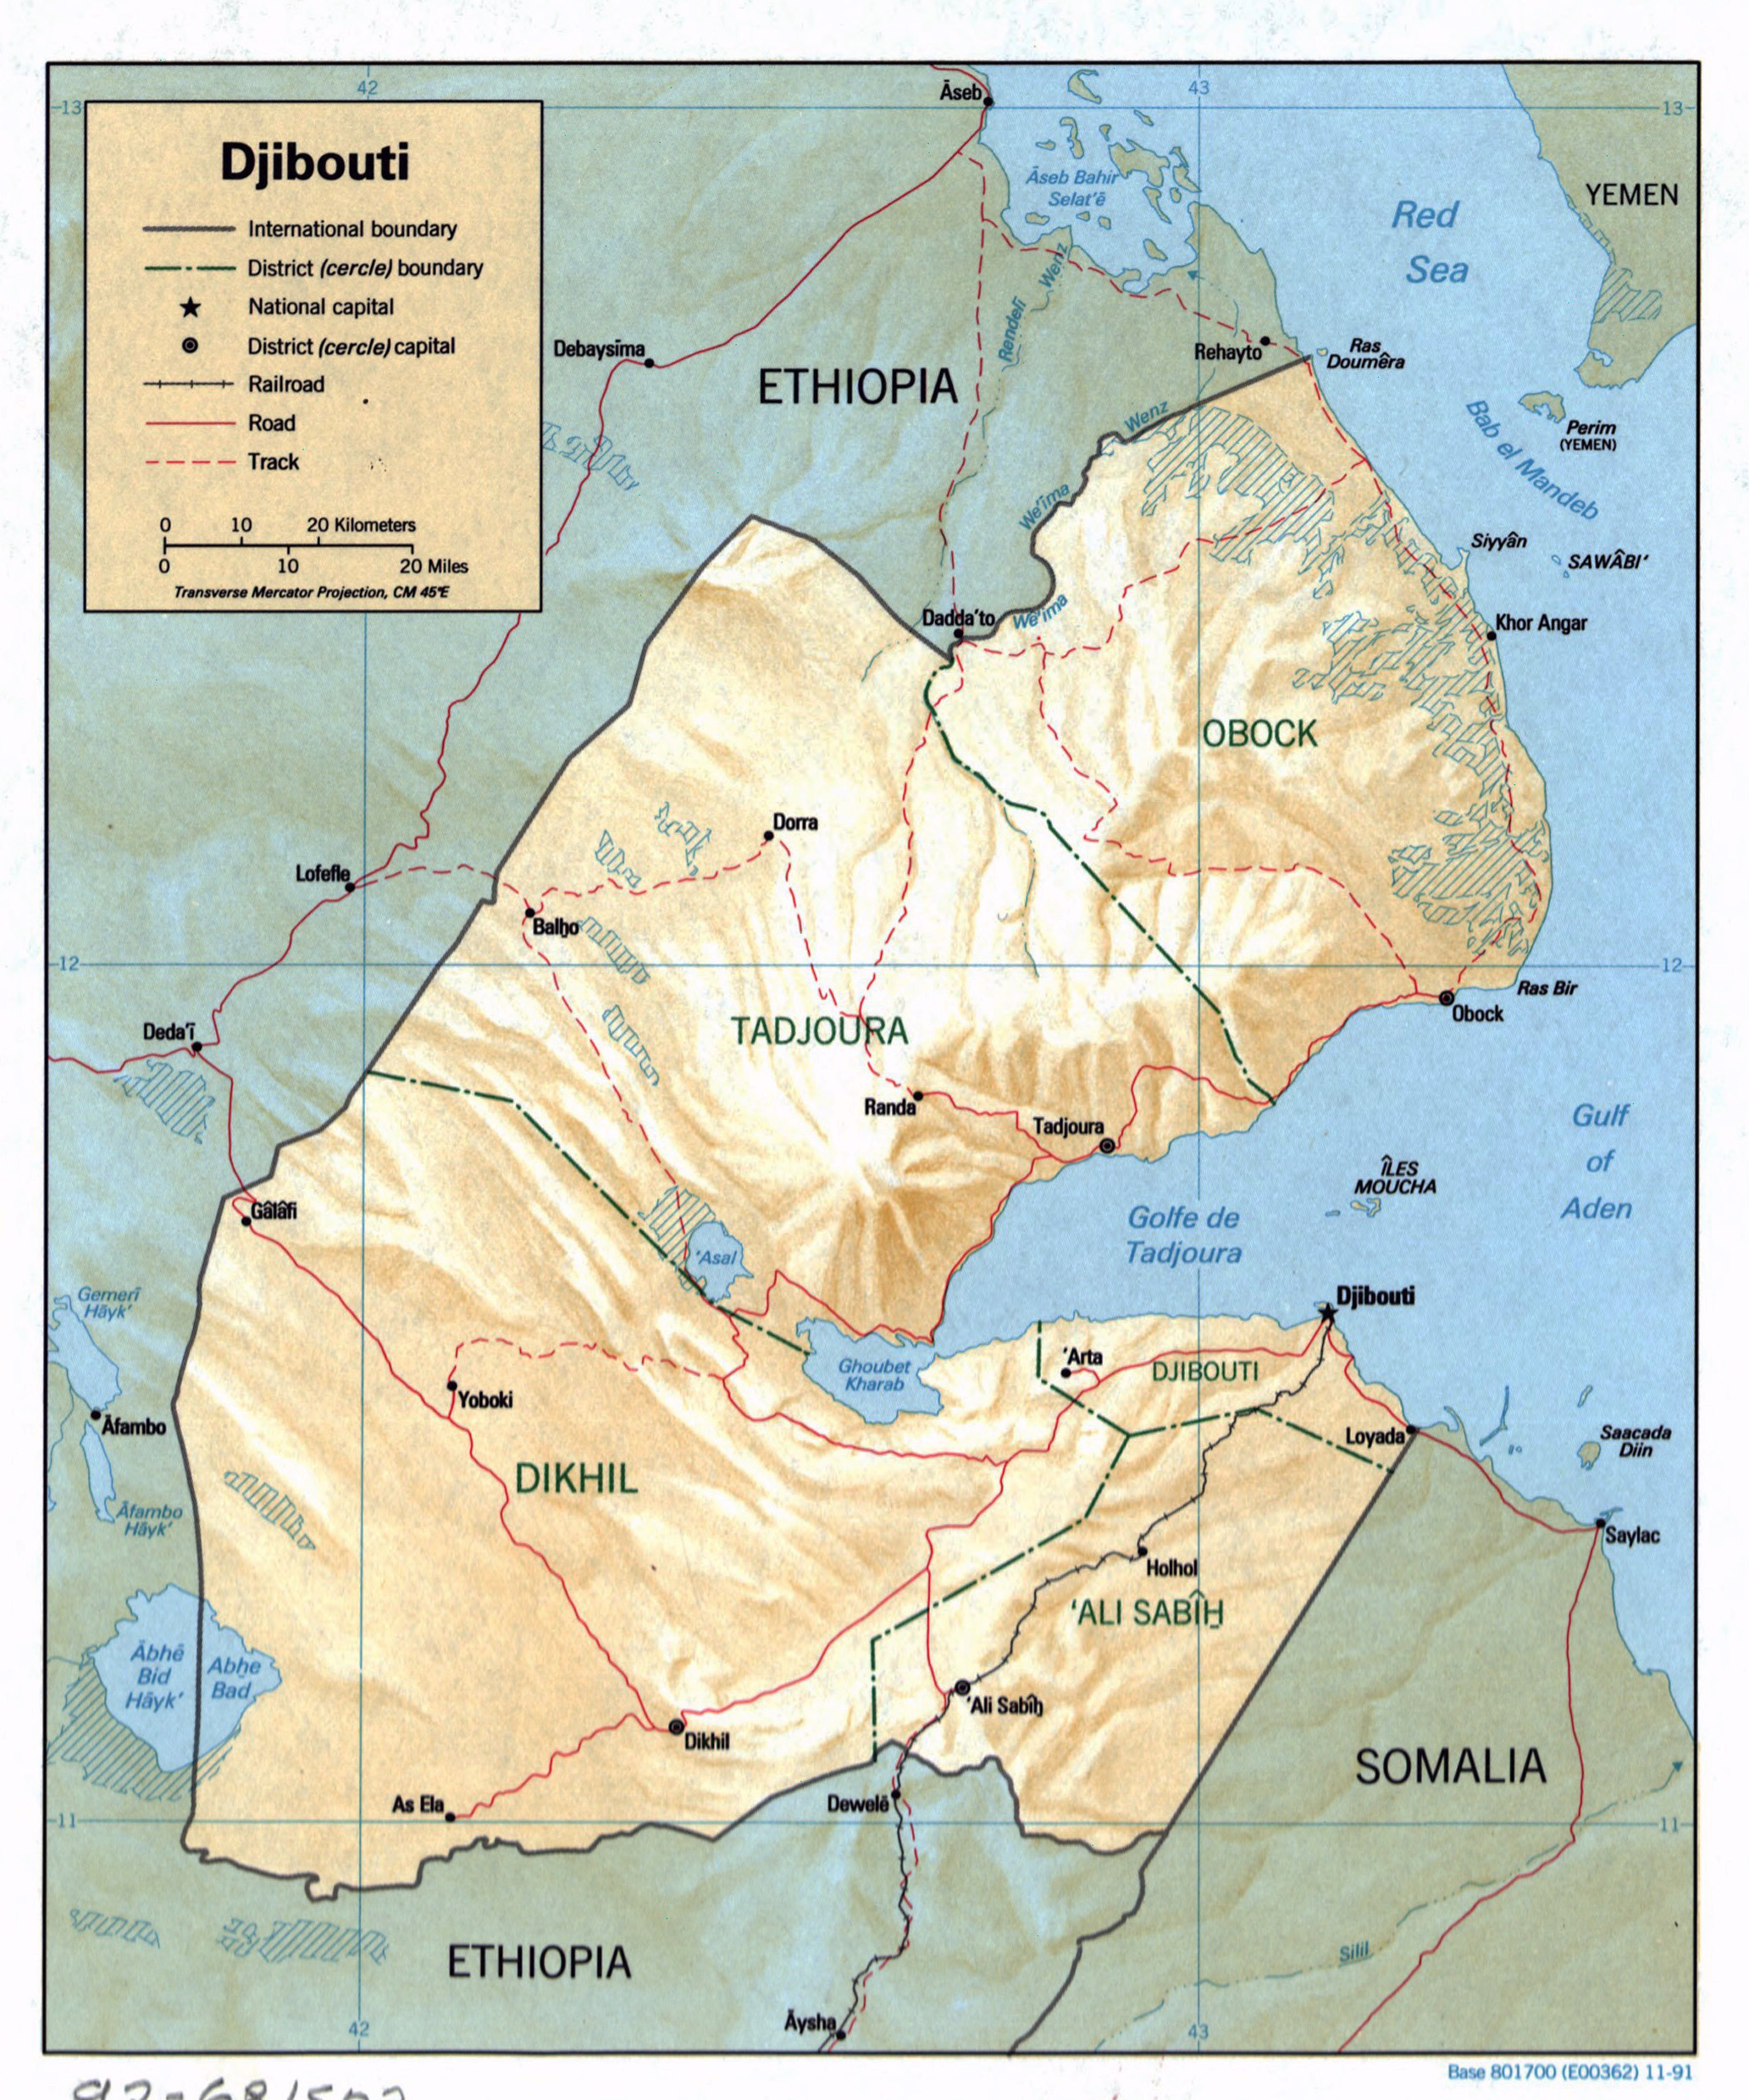 Large Detailed Political And Administrative Map Of Djibouti With Relief Roads Railroads And